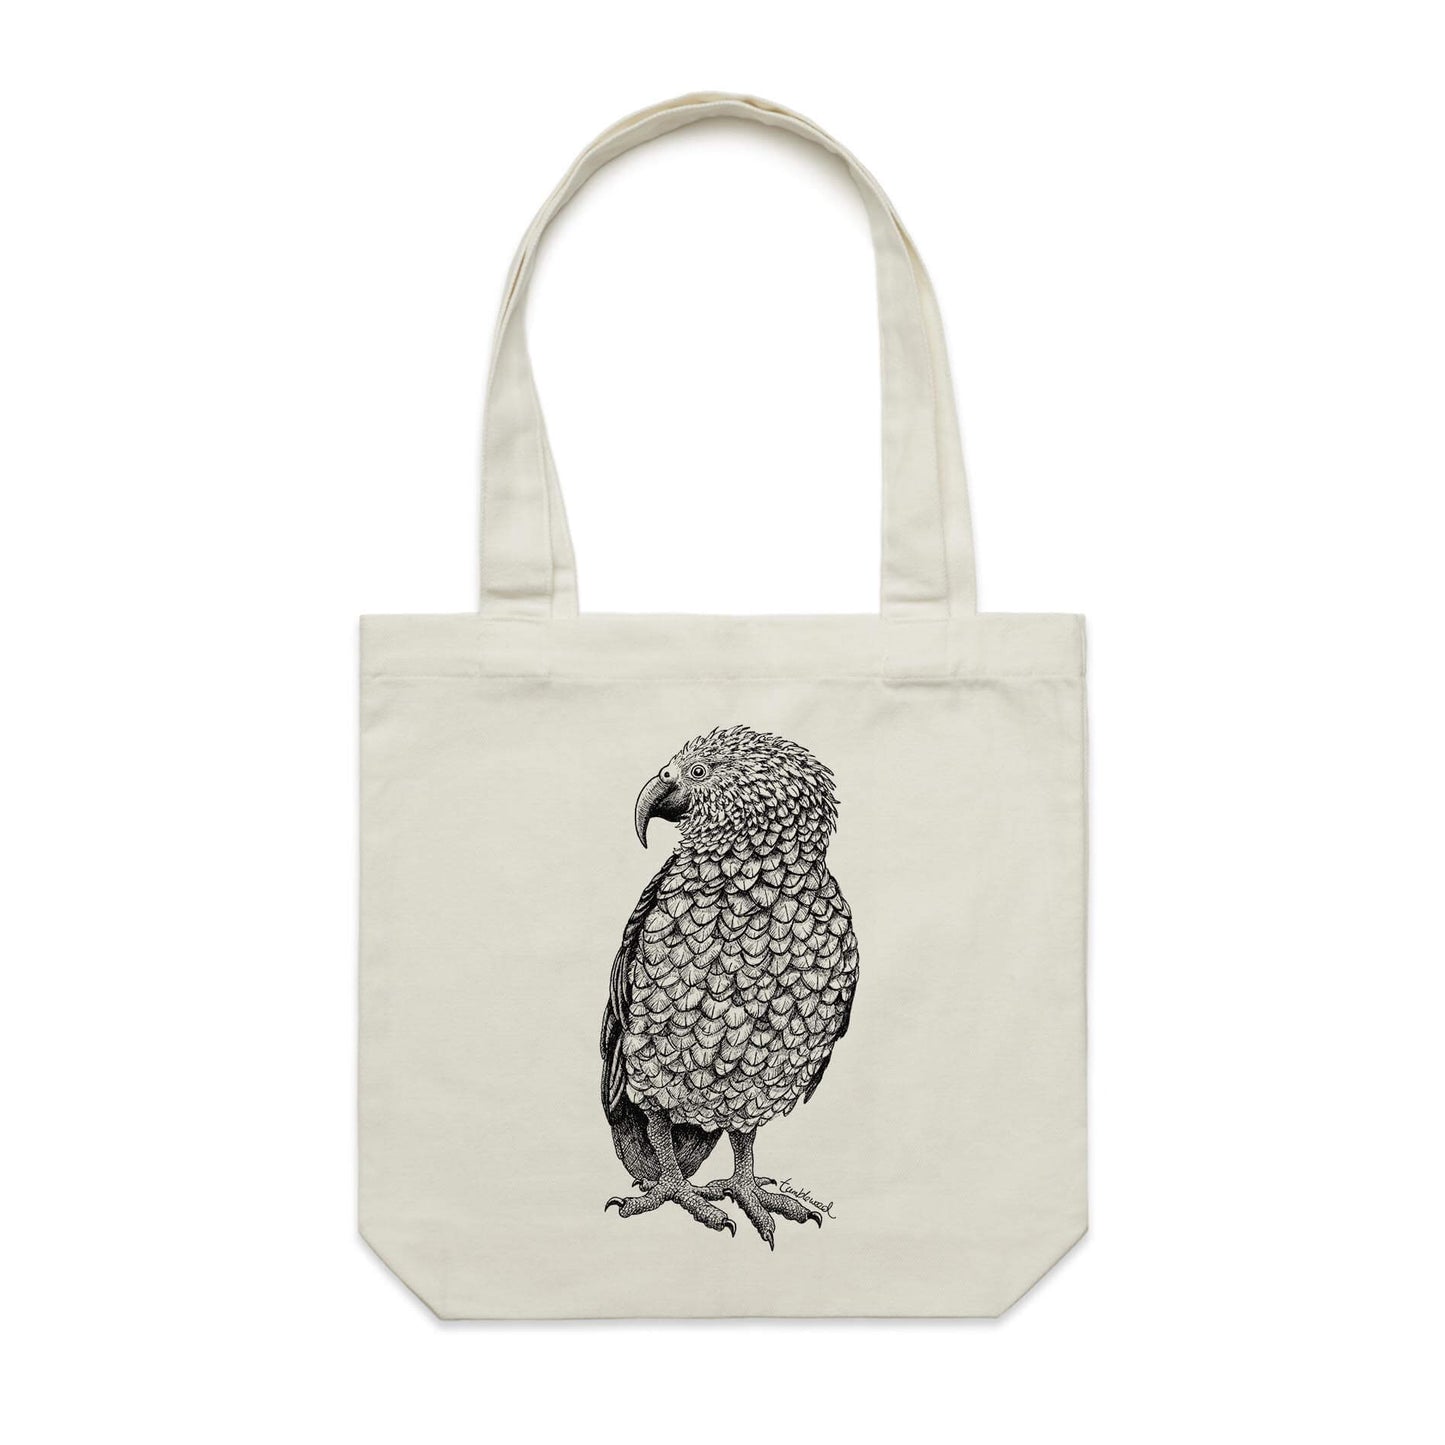 Cotton canvas tote bag with a screen printed Kea design.